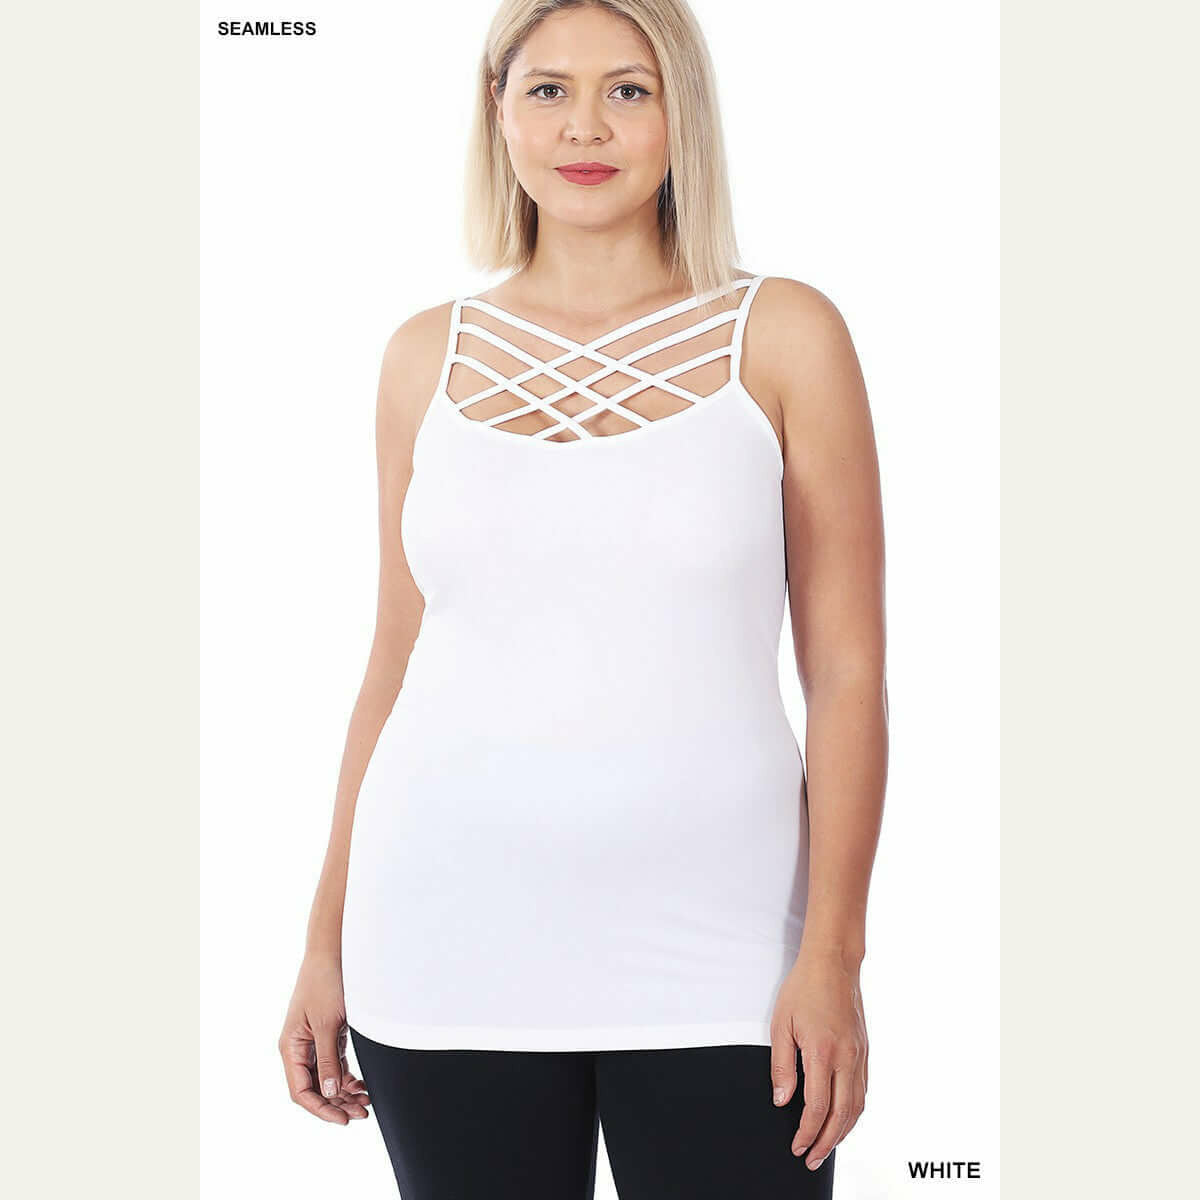 Curvy Criss Cross Cami This cami is great for layering under so many types of different tops. With a pretty criss-cross design in the front. Making it stylish and flattering!   92% nylon 8% spandex